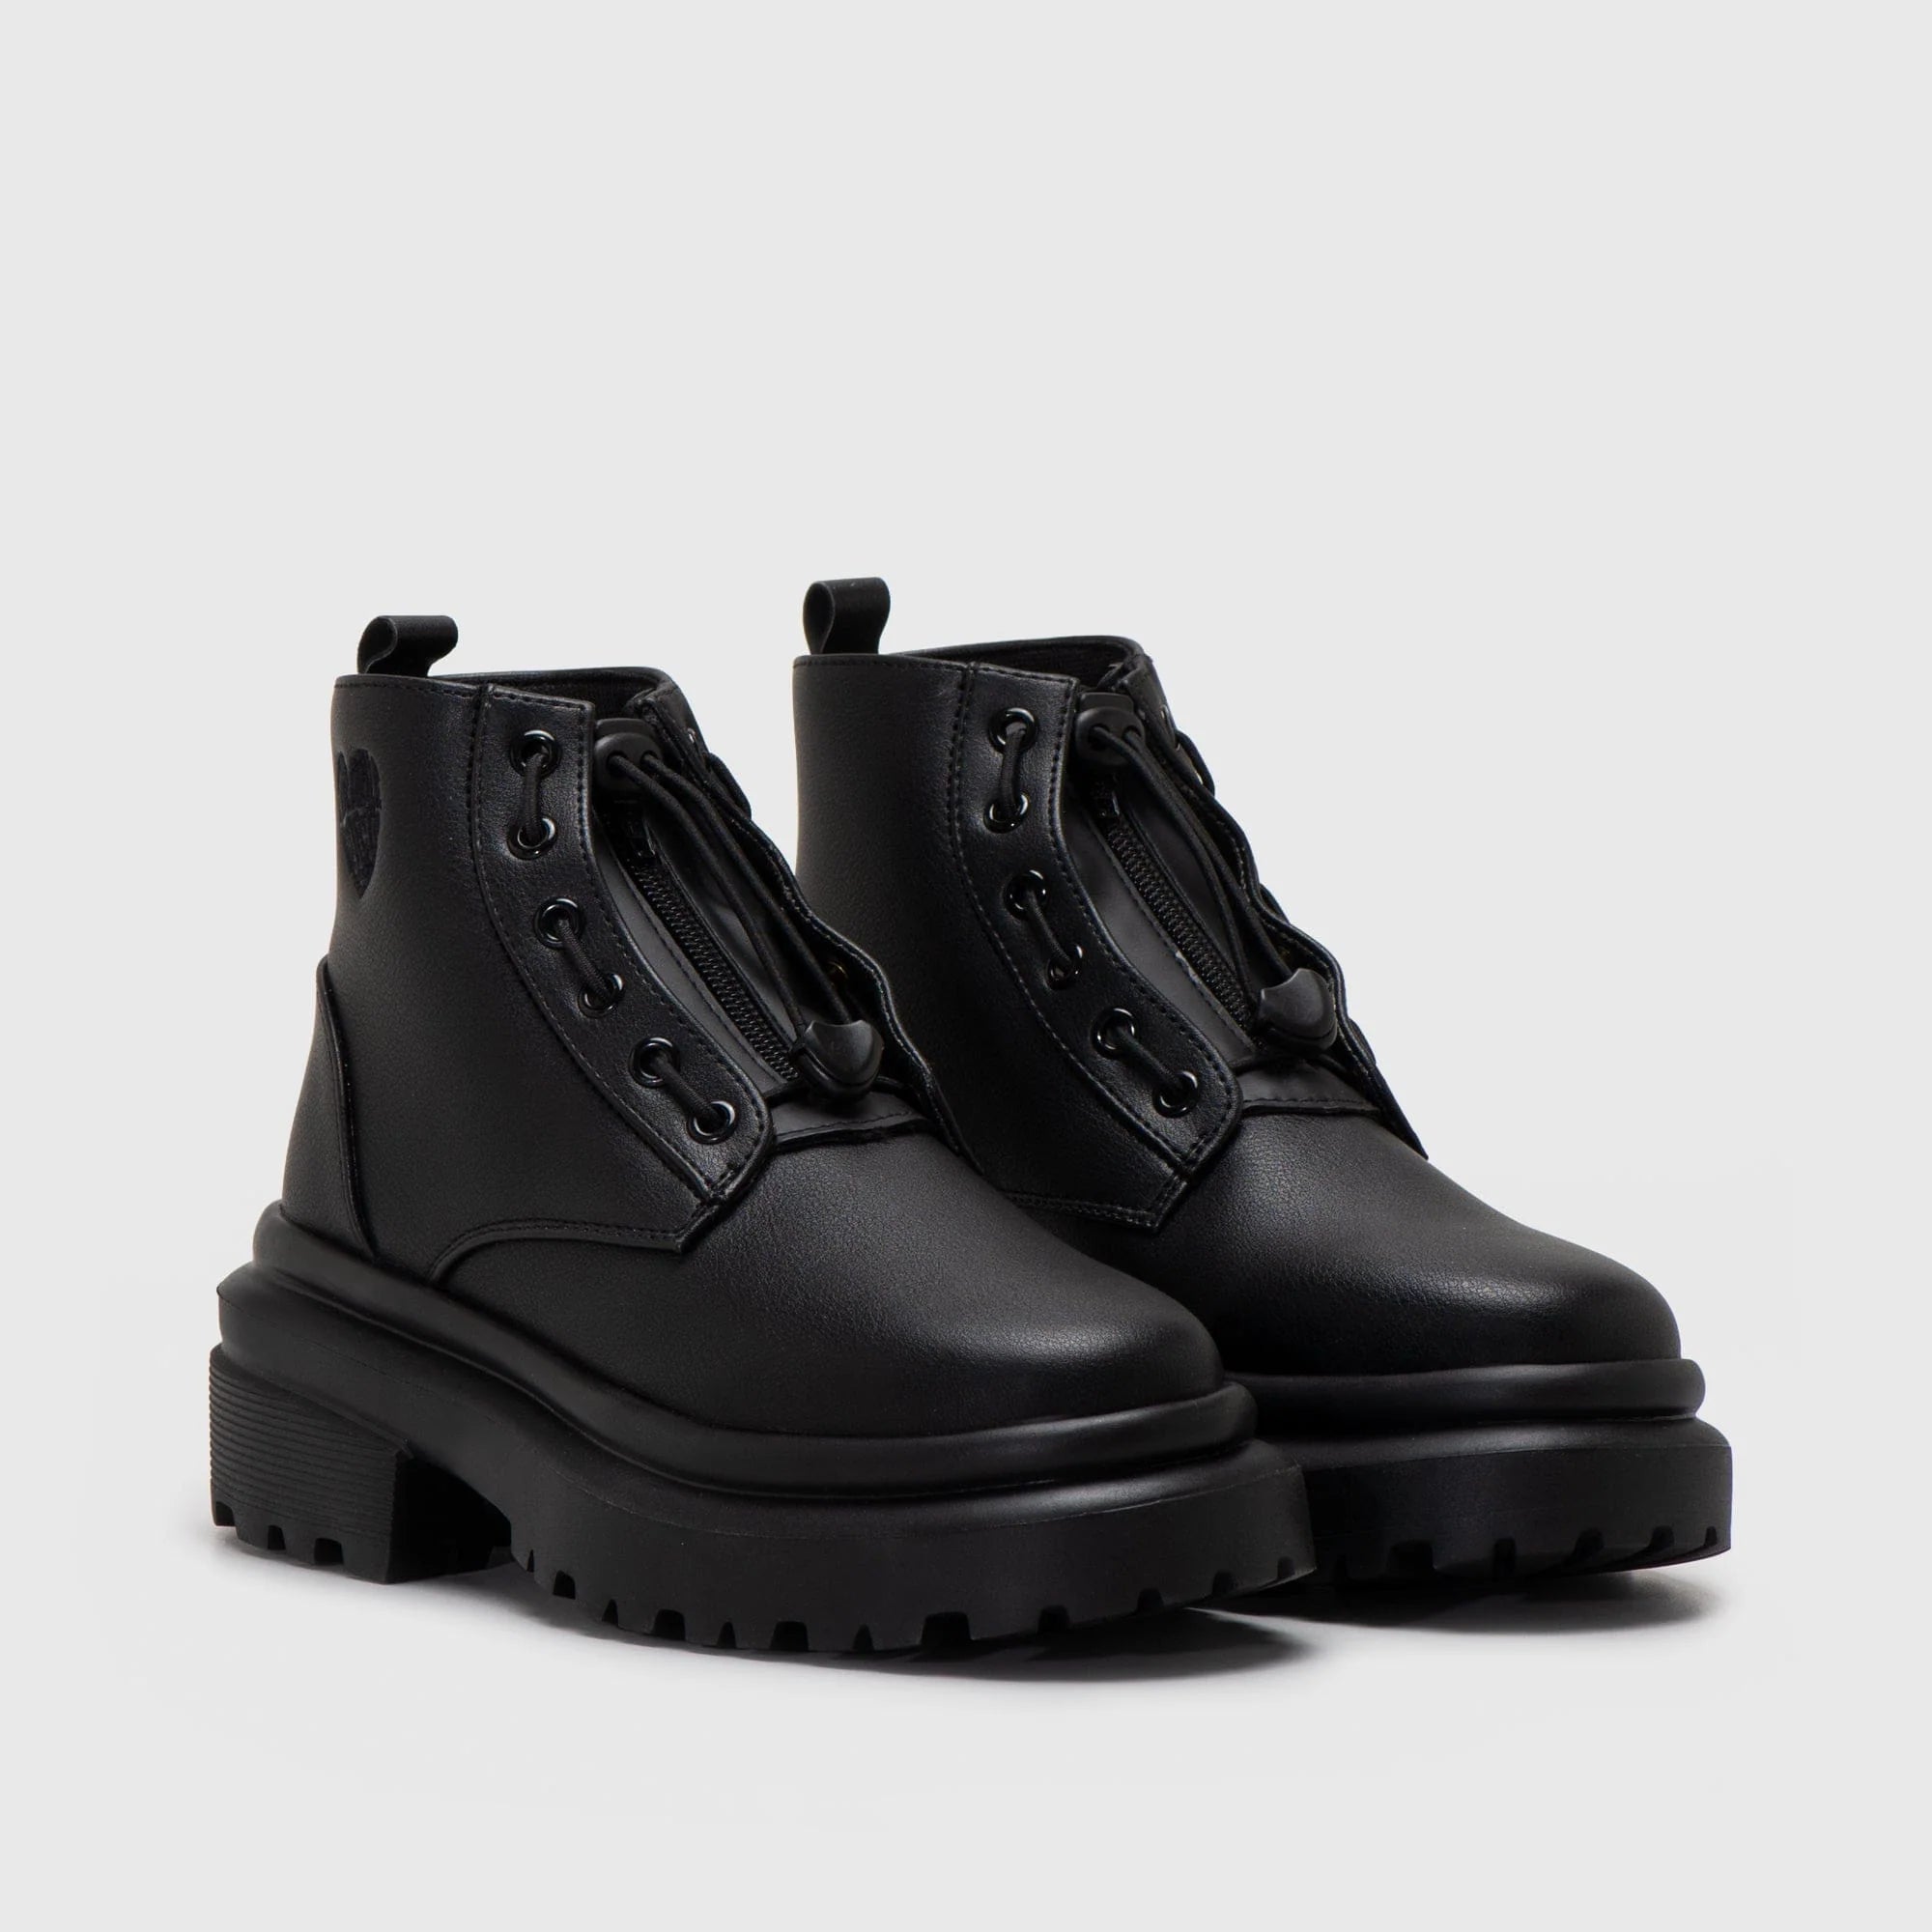 Adorable Project Noemi Boots Black